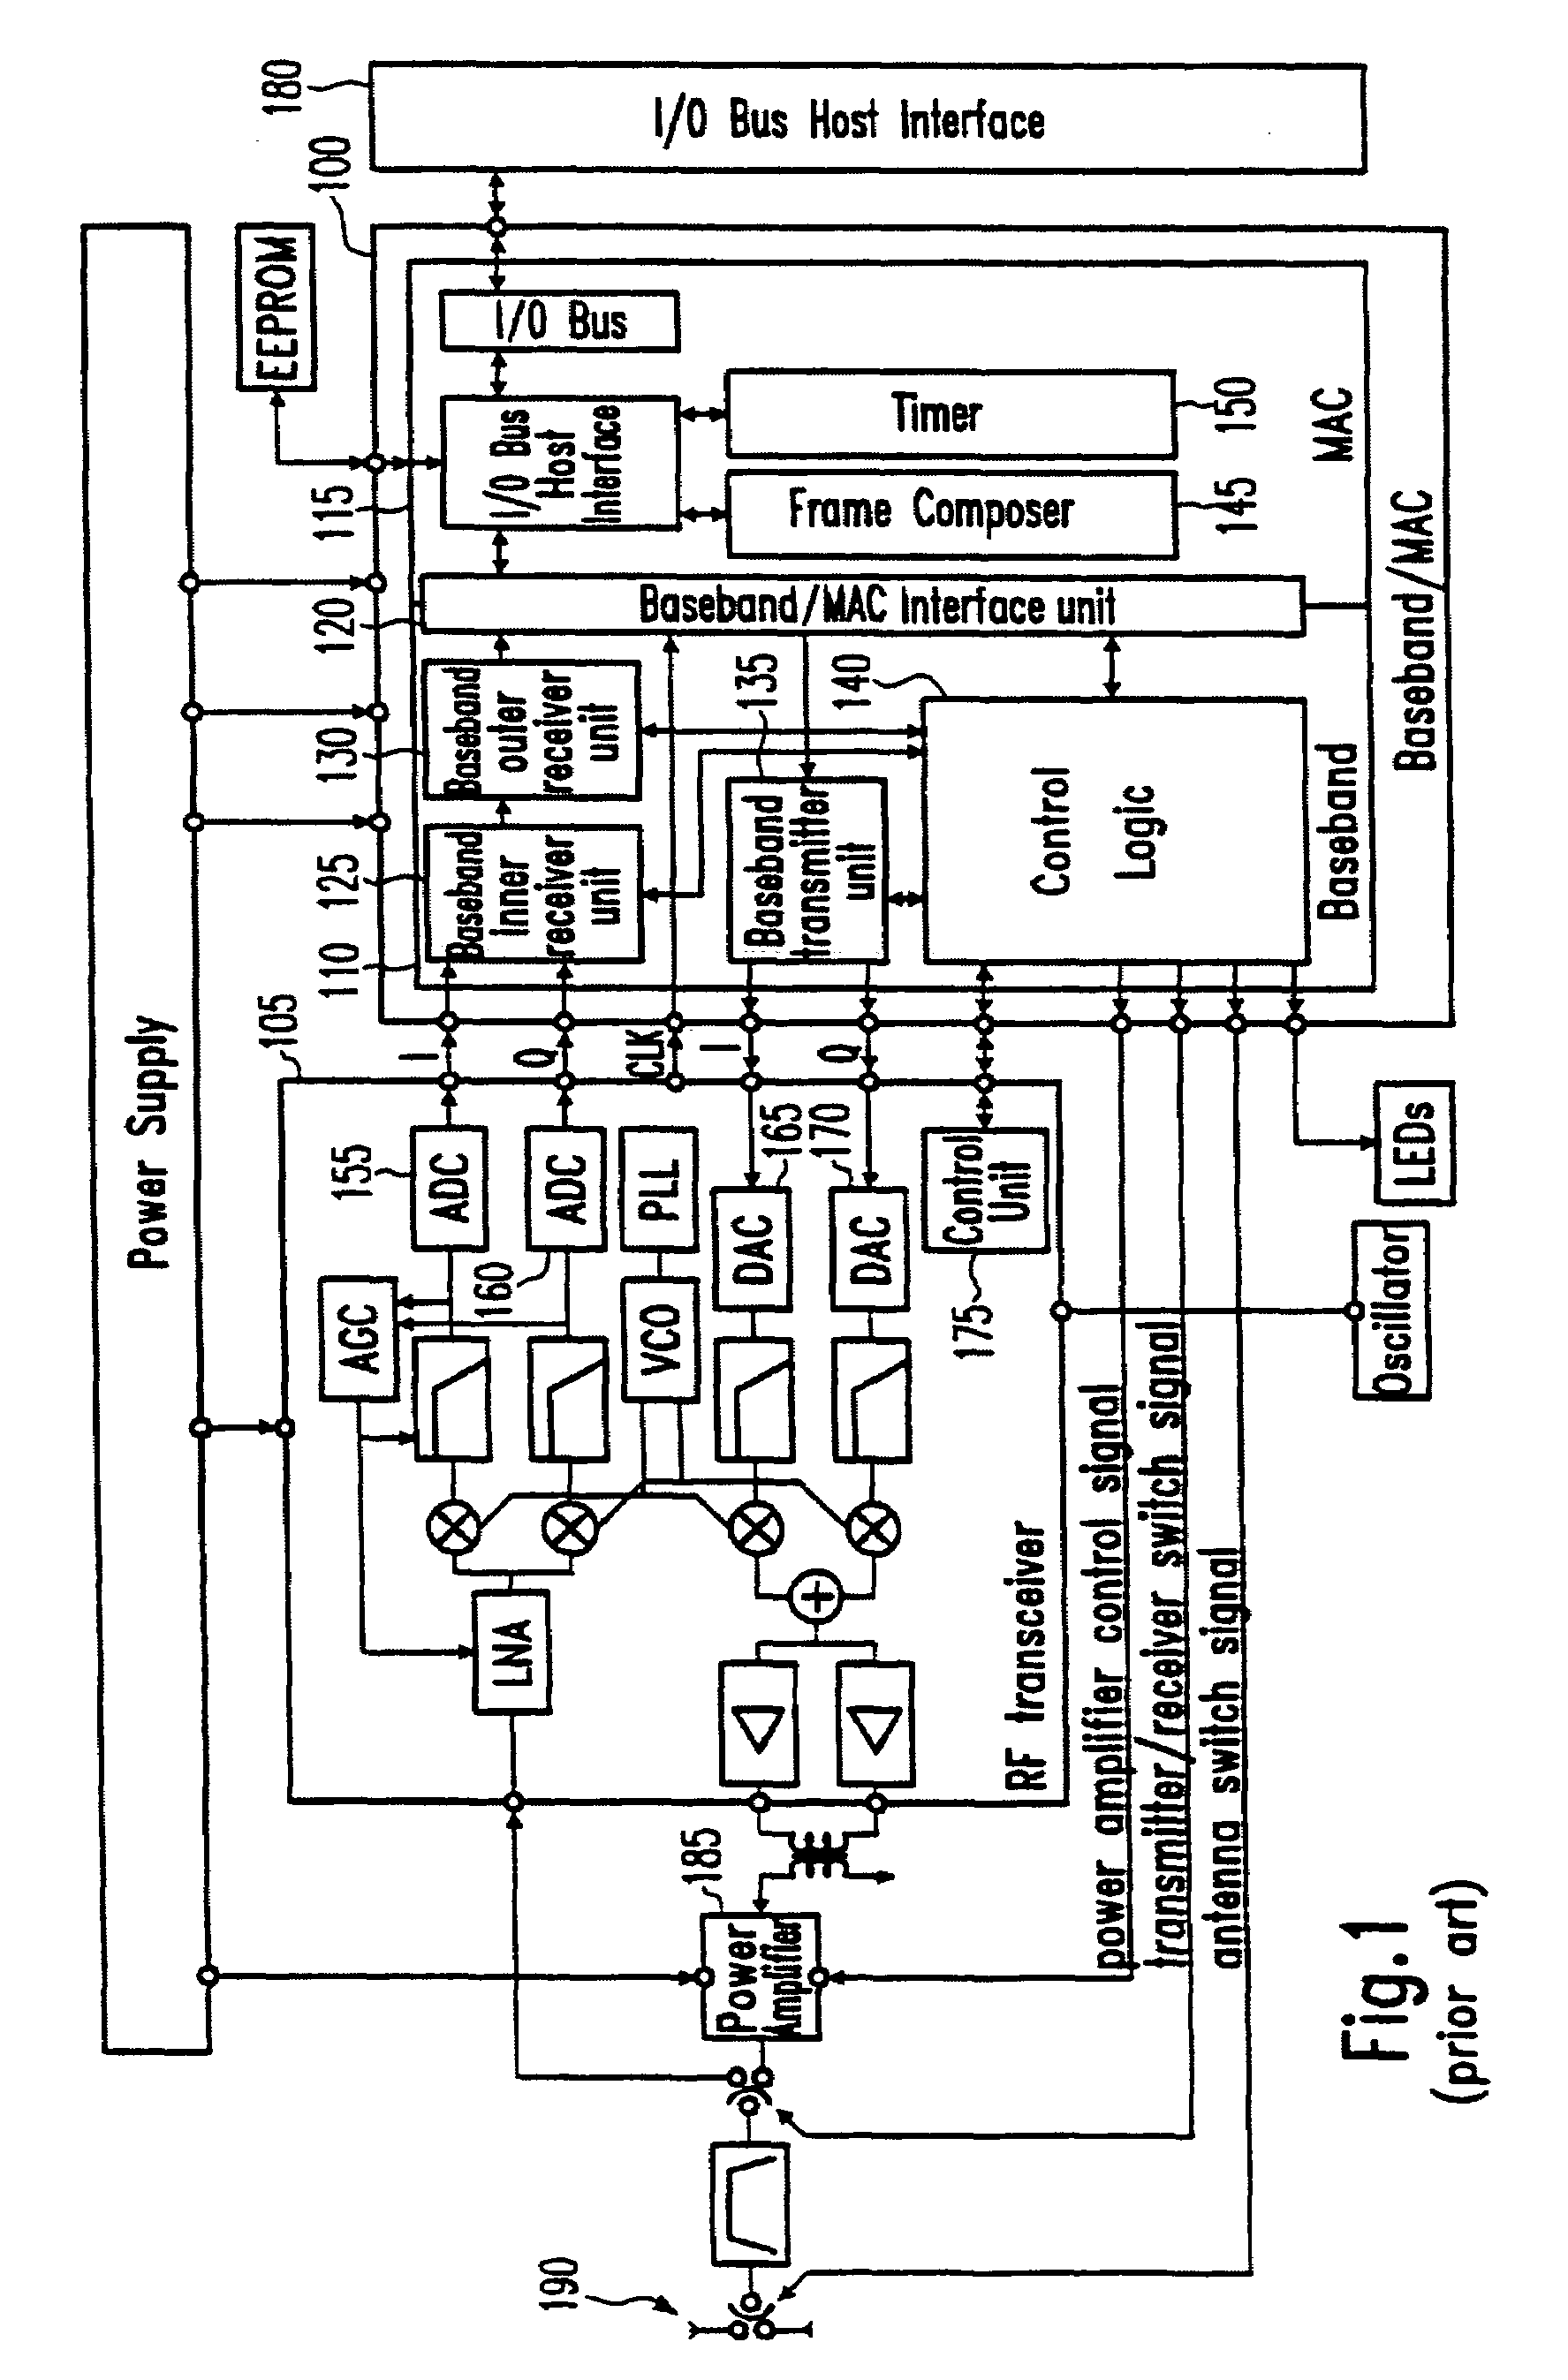 Rate dependent transmission gain control for WLAN systems